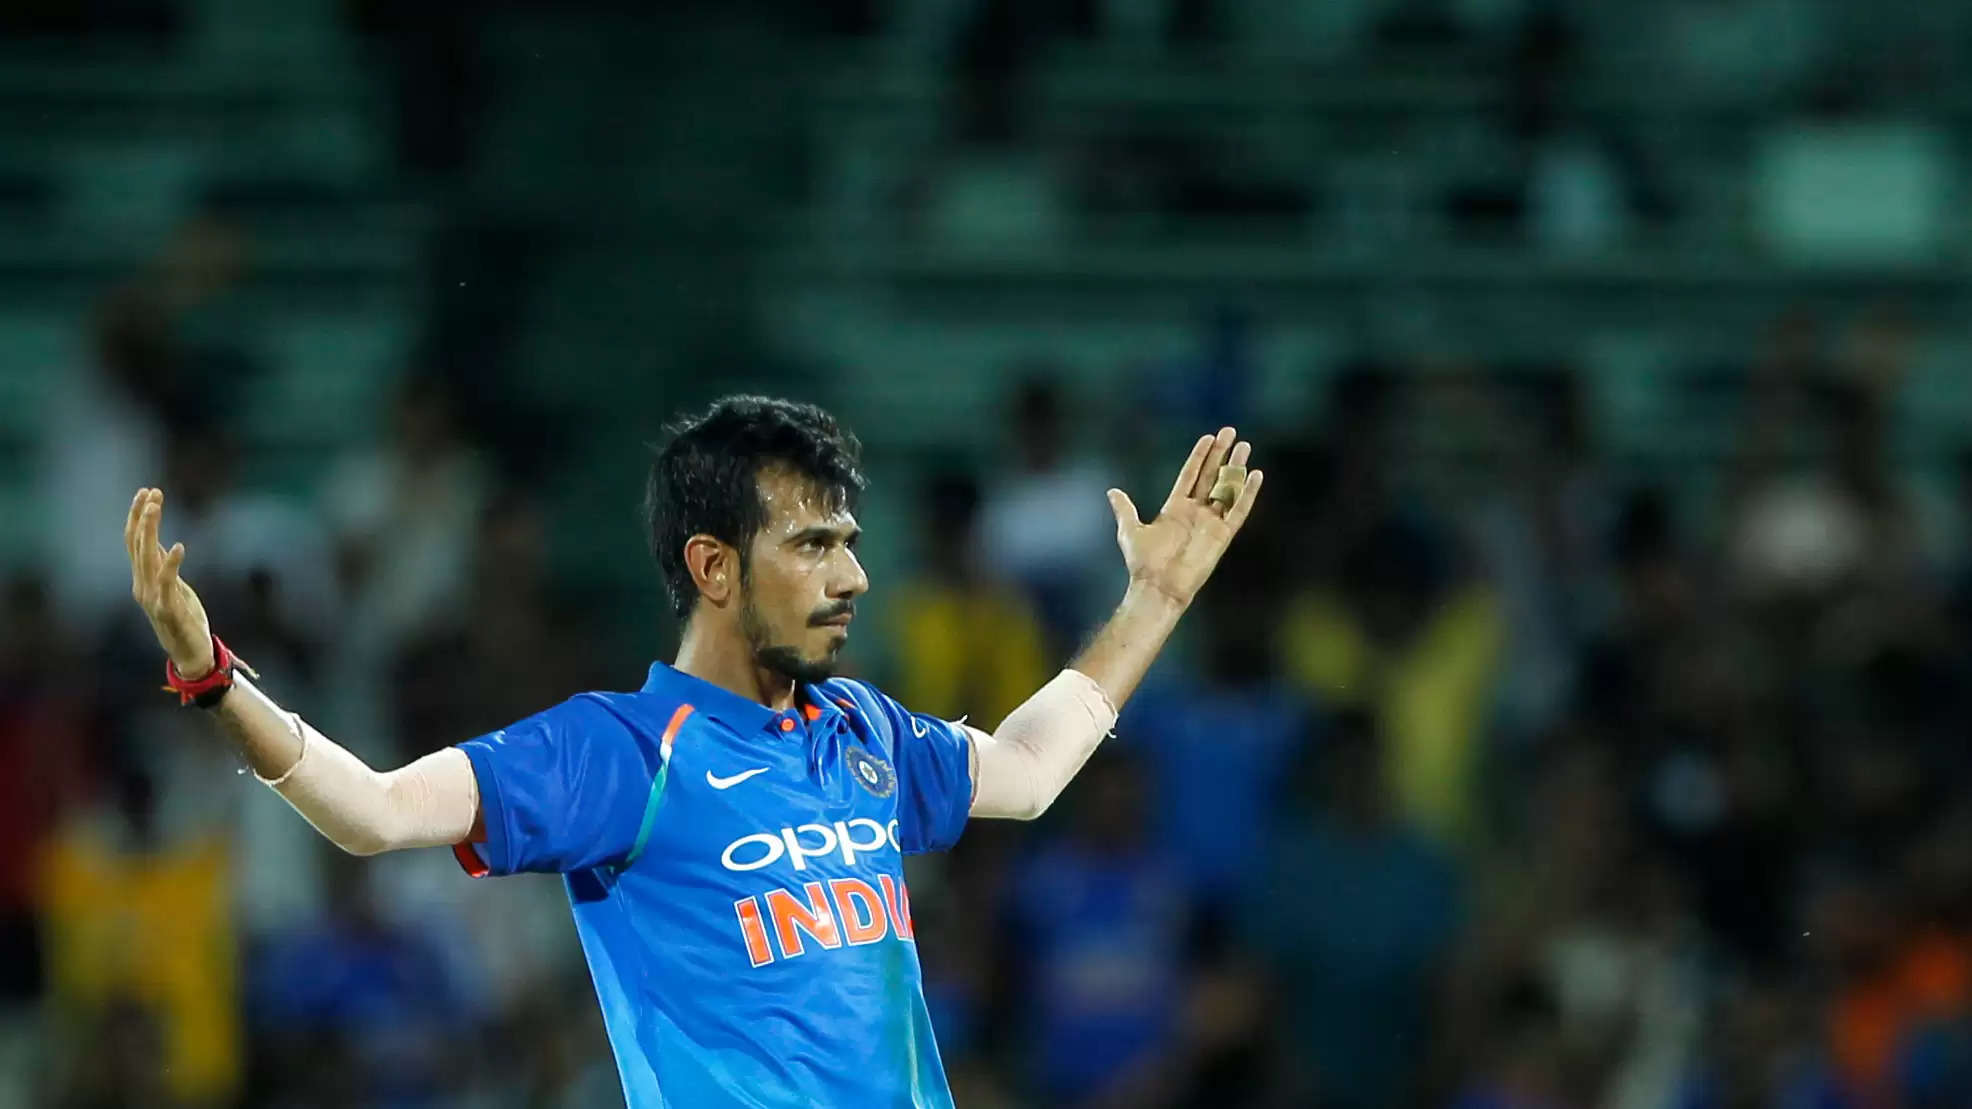 Did Yuzvendra Chahal’s quest for wickets cost him a spot in India’s T20 World Cup squad?